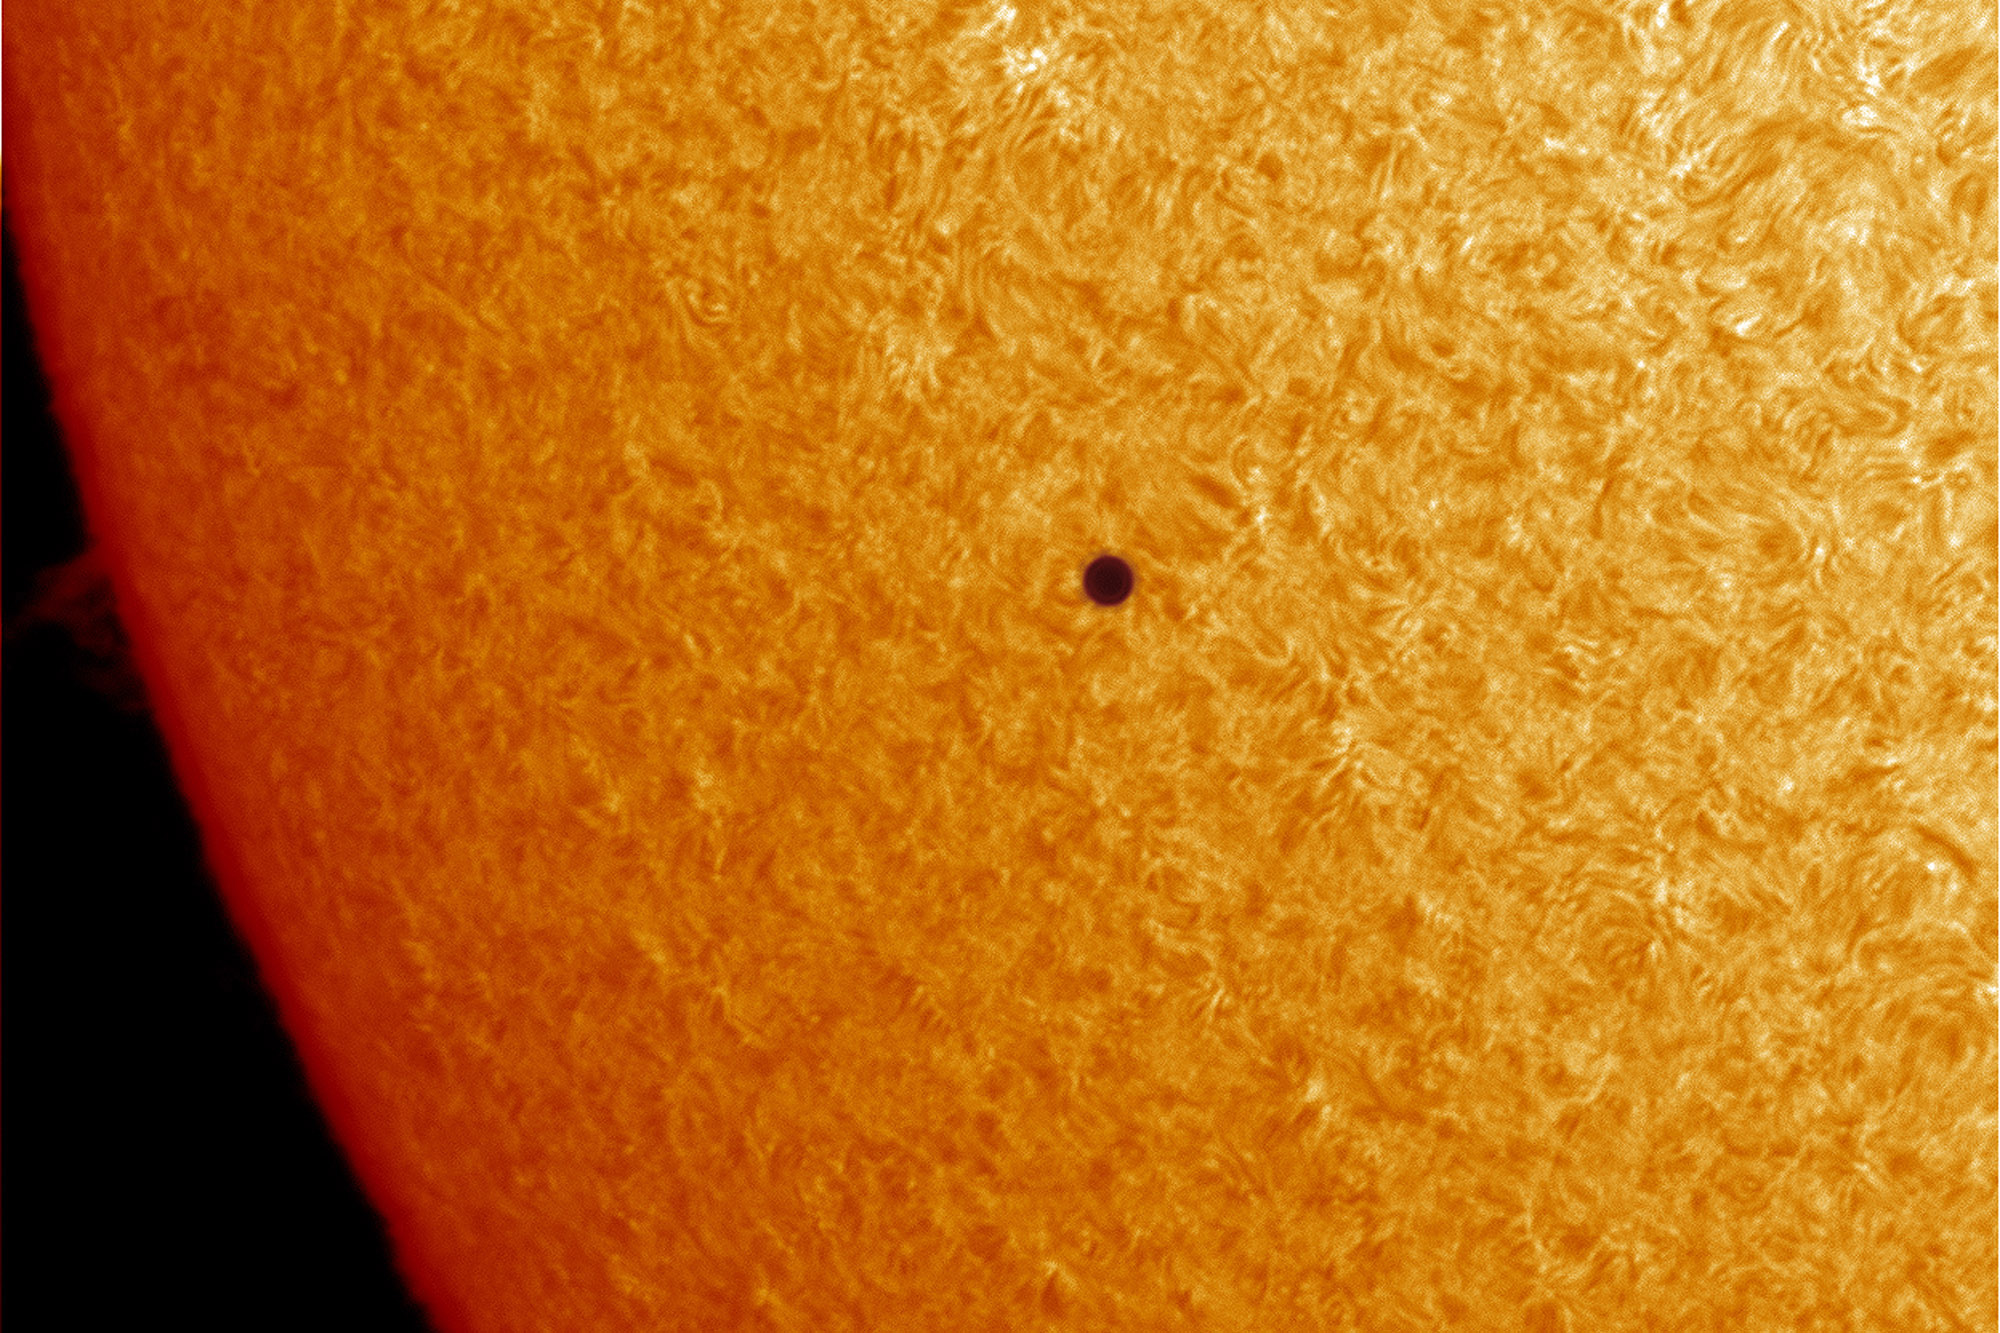 The planet Mercury transits across the face of the sun in 2016. Because it is the closest planet to the sun, it will naturally fall in the same sign as the sun or in the sign that proceeds or precedes it.